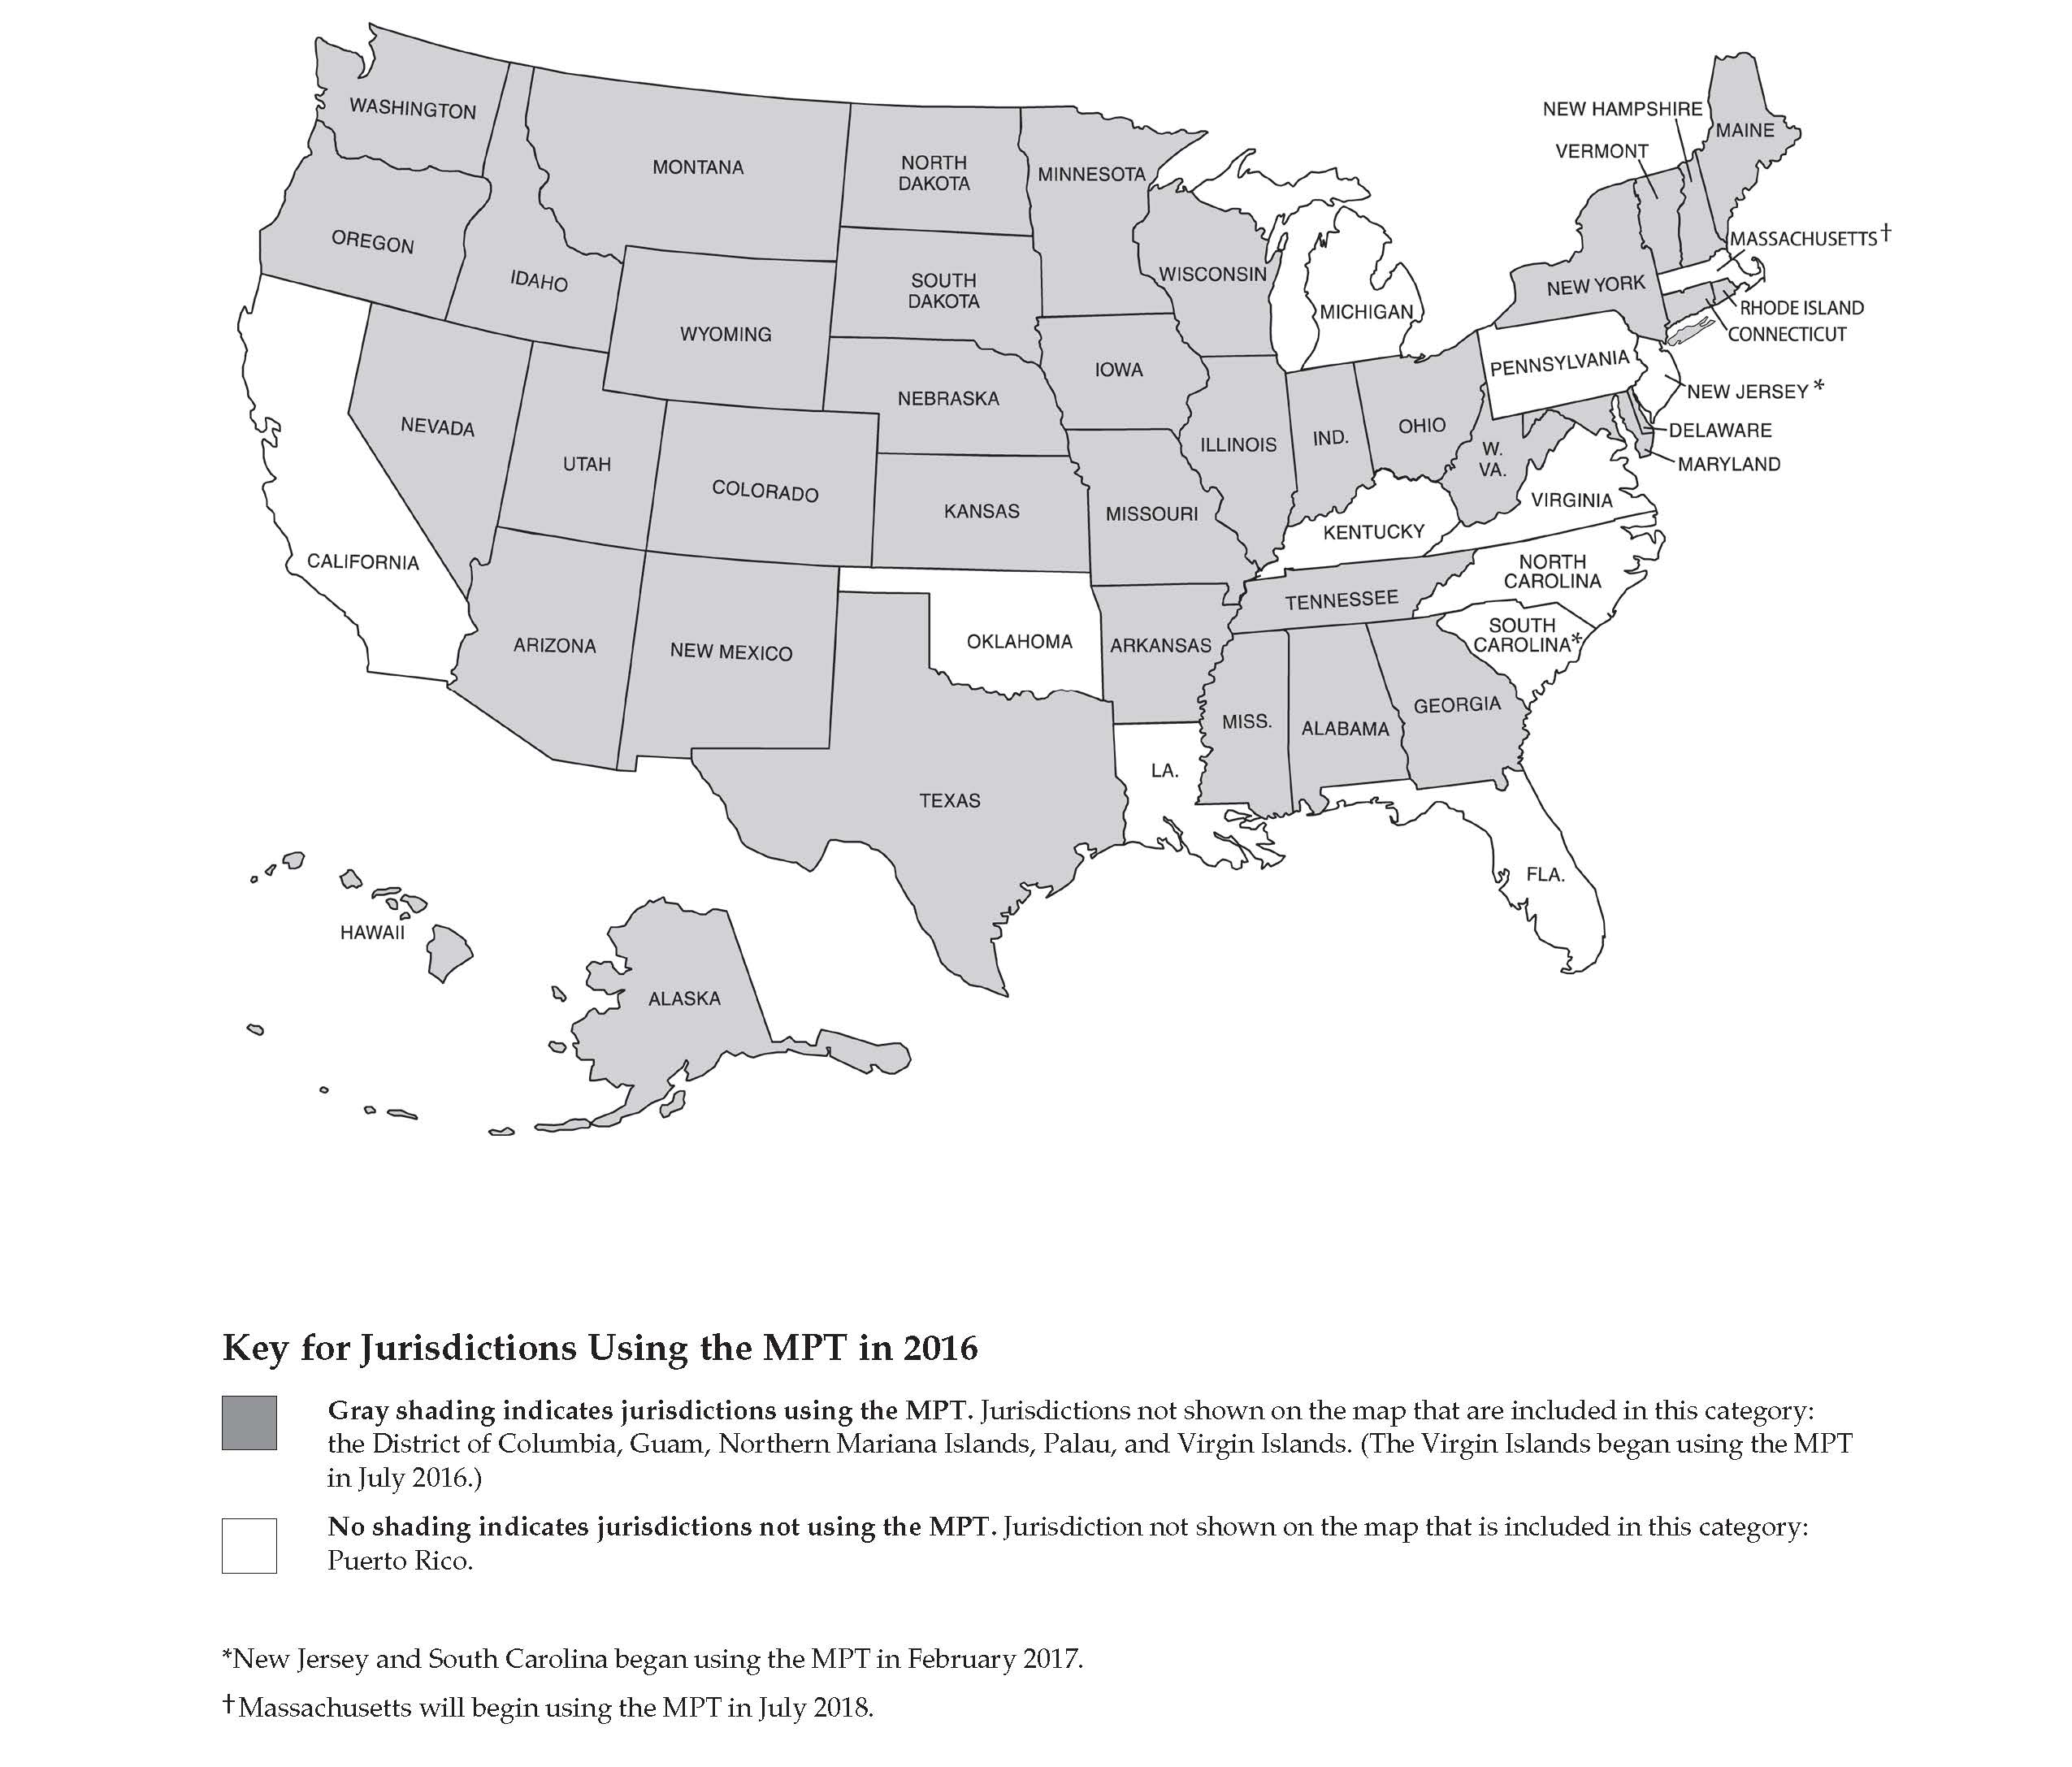 This map shows that all U.S. jurisdictions, with the exceptions of Louisiana and Puerto Rico, used the MBE in 2016.